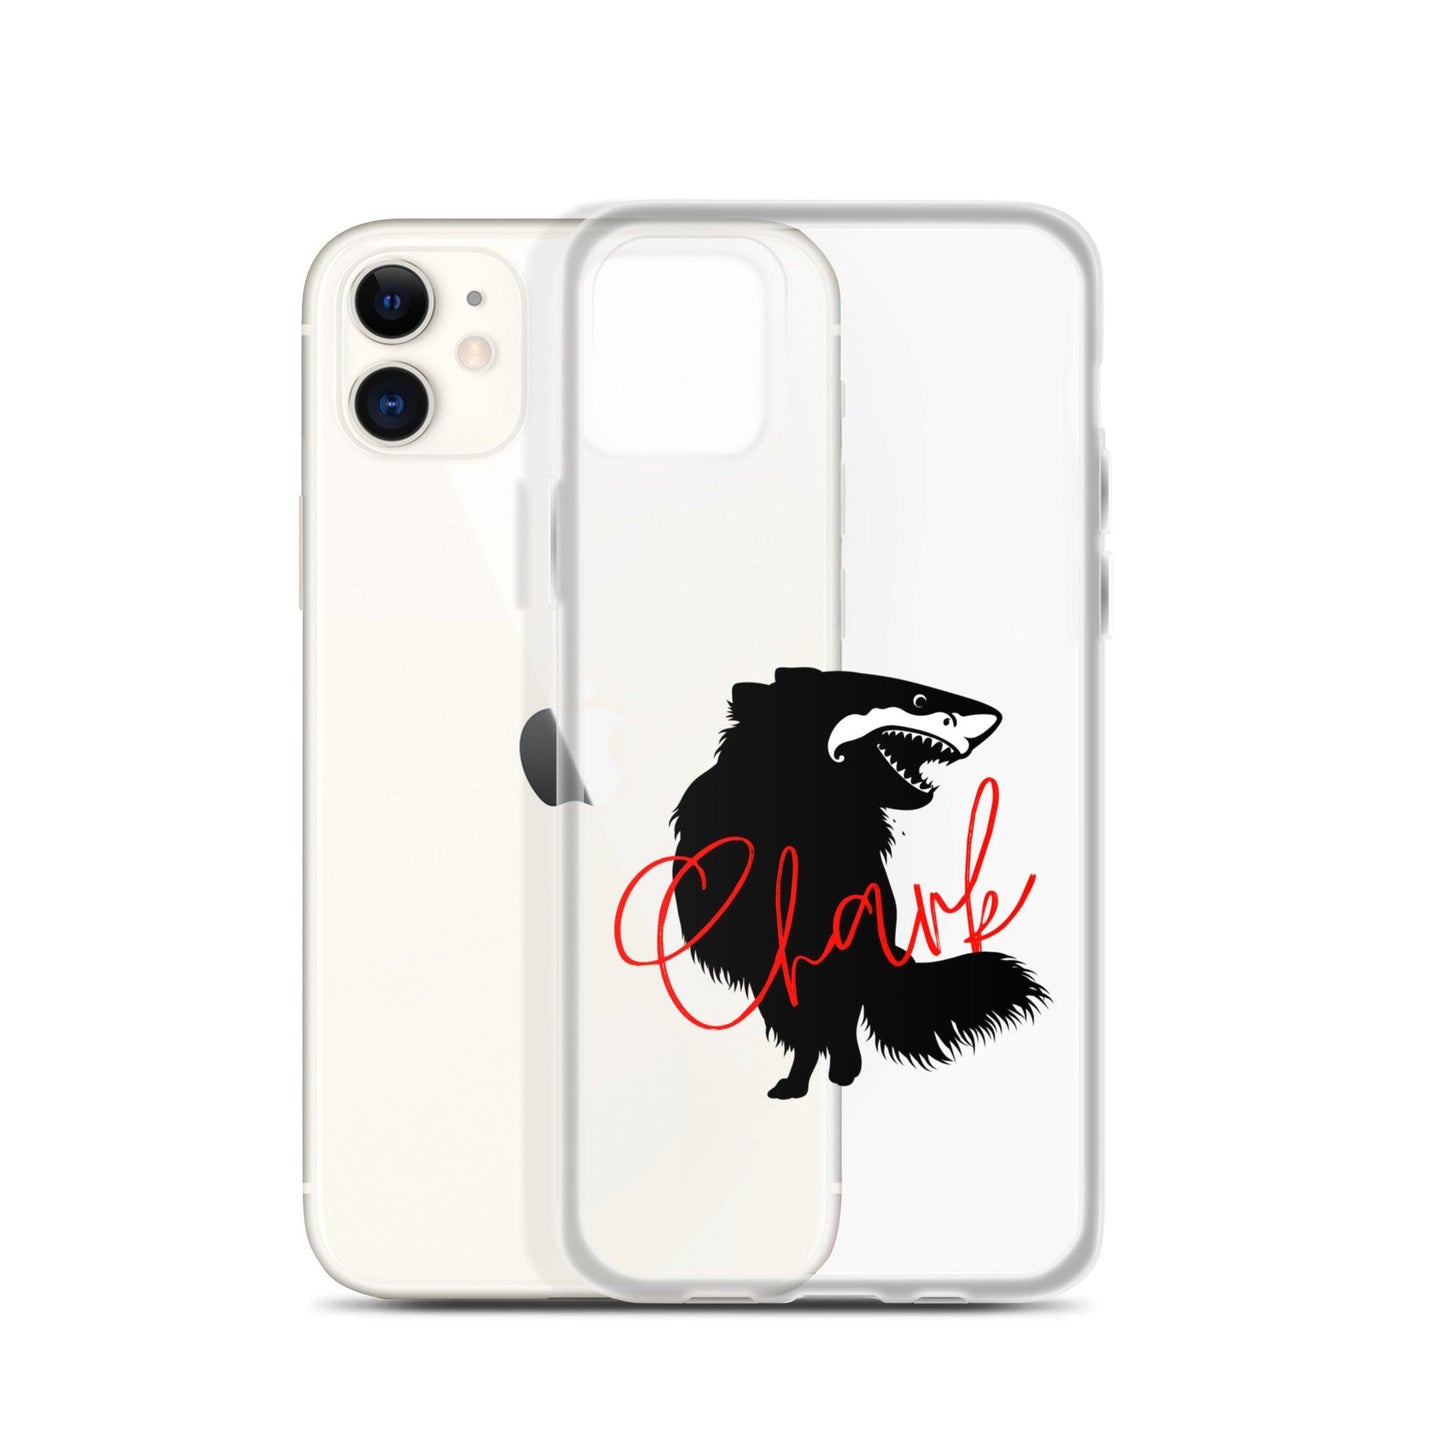 Chihuahua + Shark = Chark Clear iPhone case with the black silhouette of a longhaired chihuahua with the face of a great white shark - mouth open to show off jaws lined with lots of sharp white teeth. The word "Chark" is artfully placed in red cursive font over the image. For trendy chi lovers. iPhone 11 case.